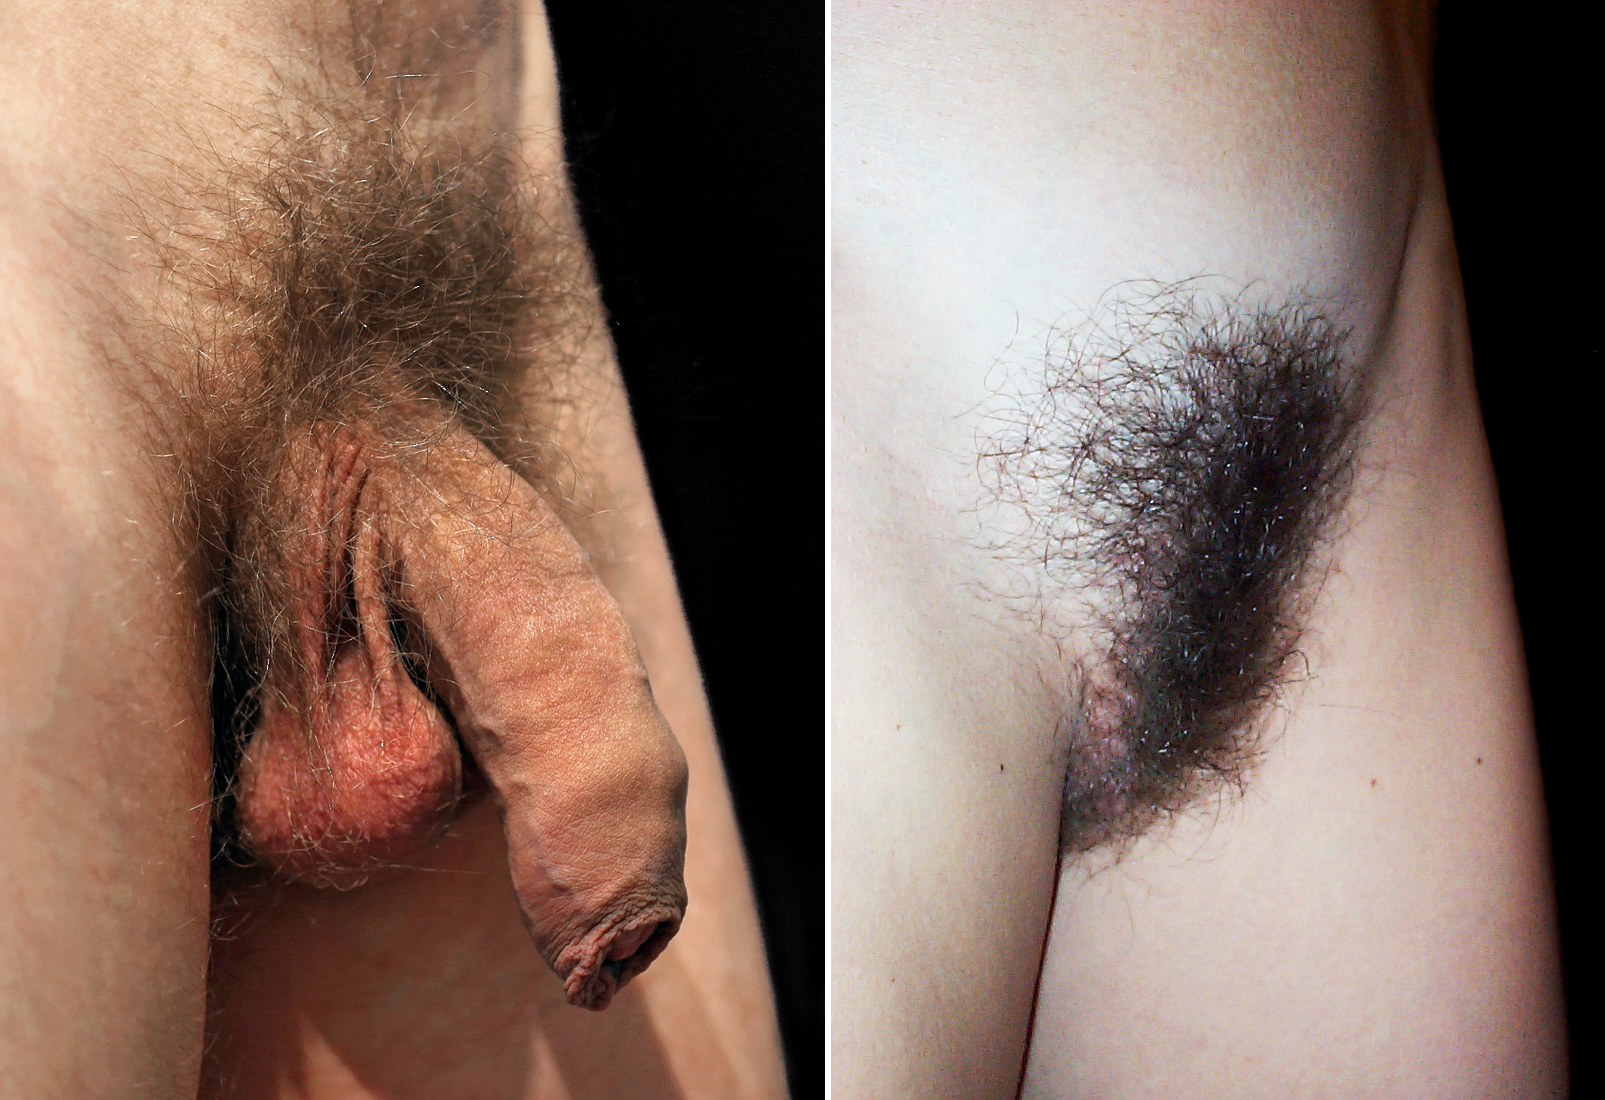 Picture of a shaved groin